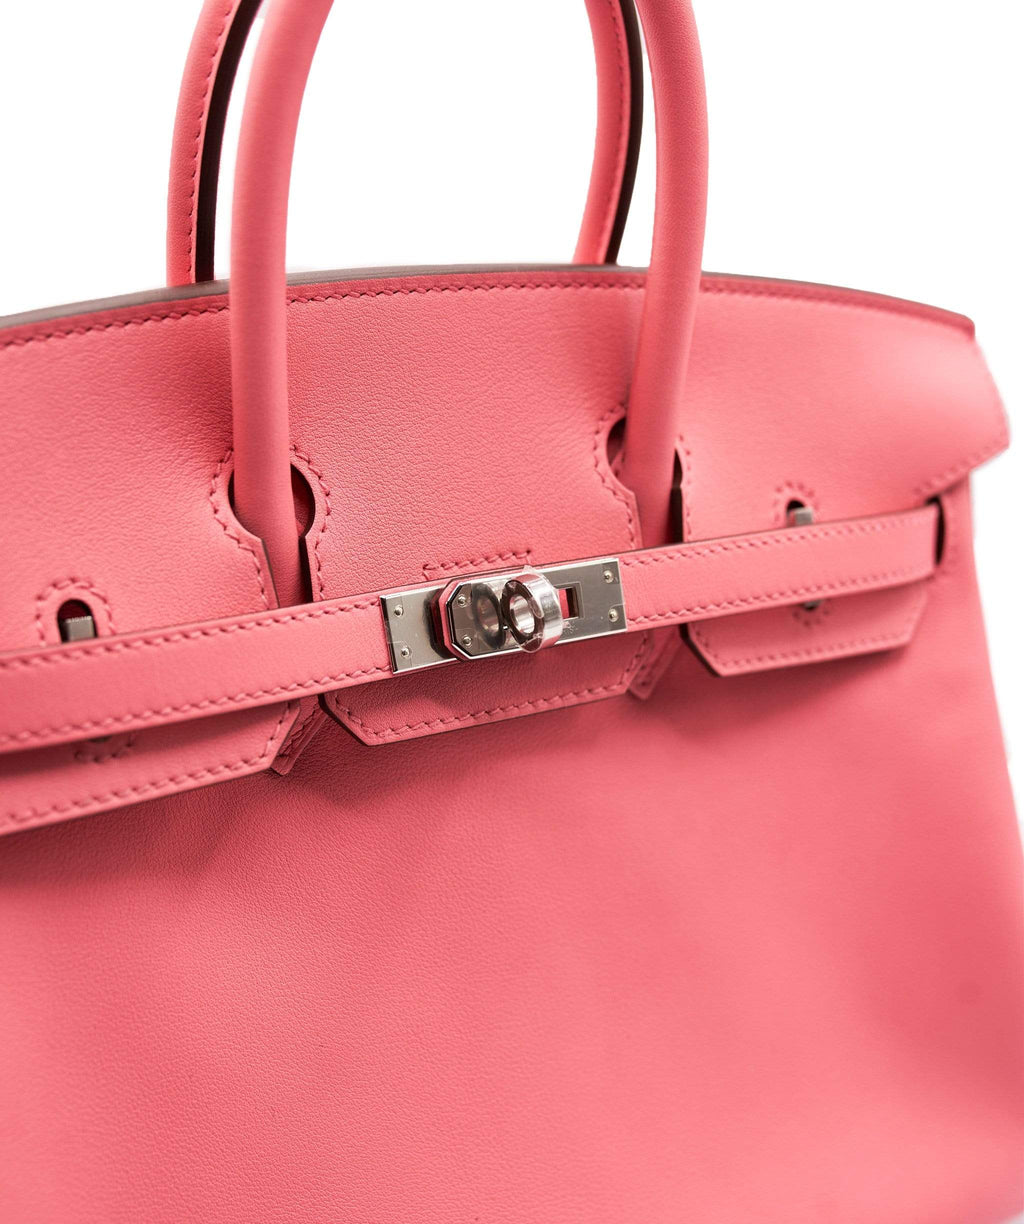 Time for your daily dose of cuteness! 🥰 Our Brand New Birkin 25